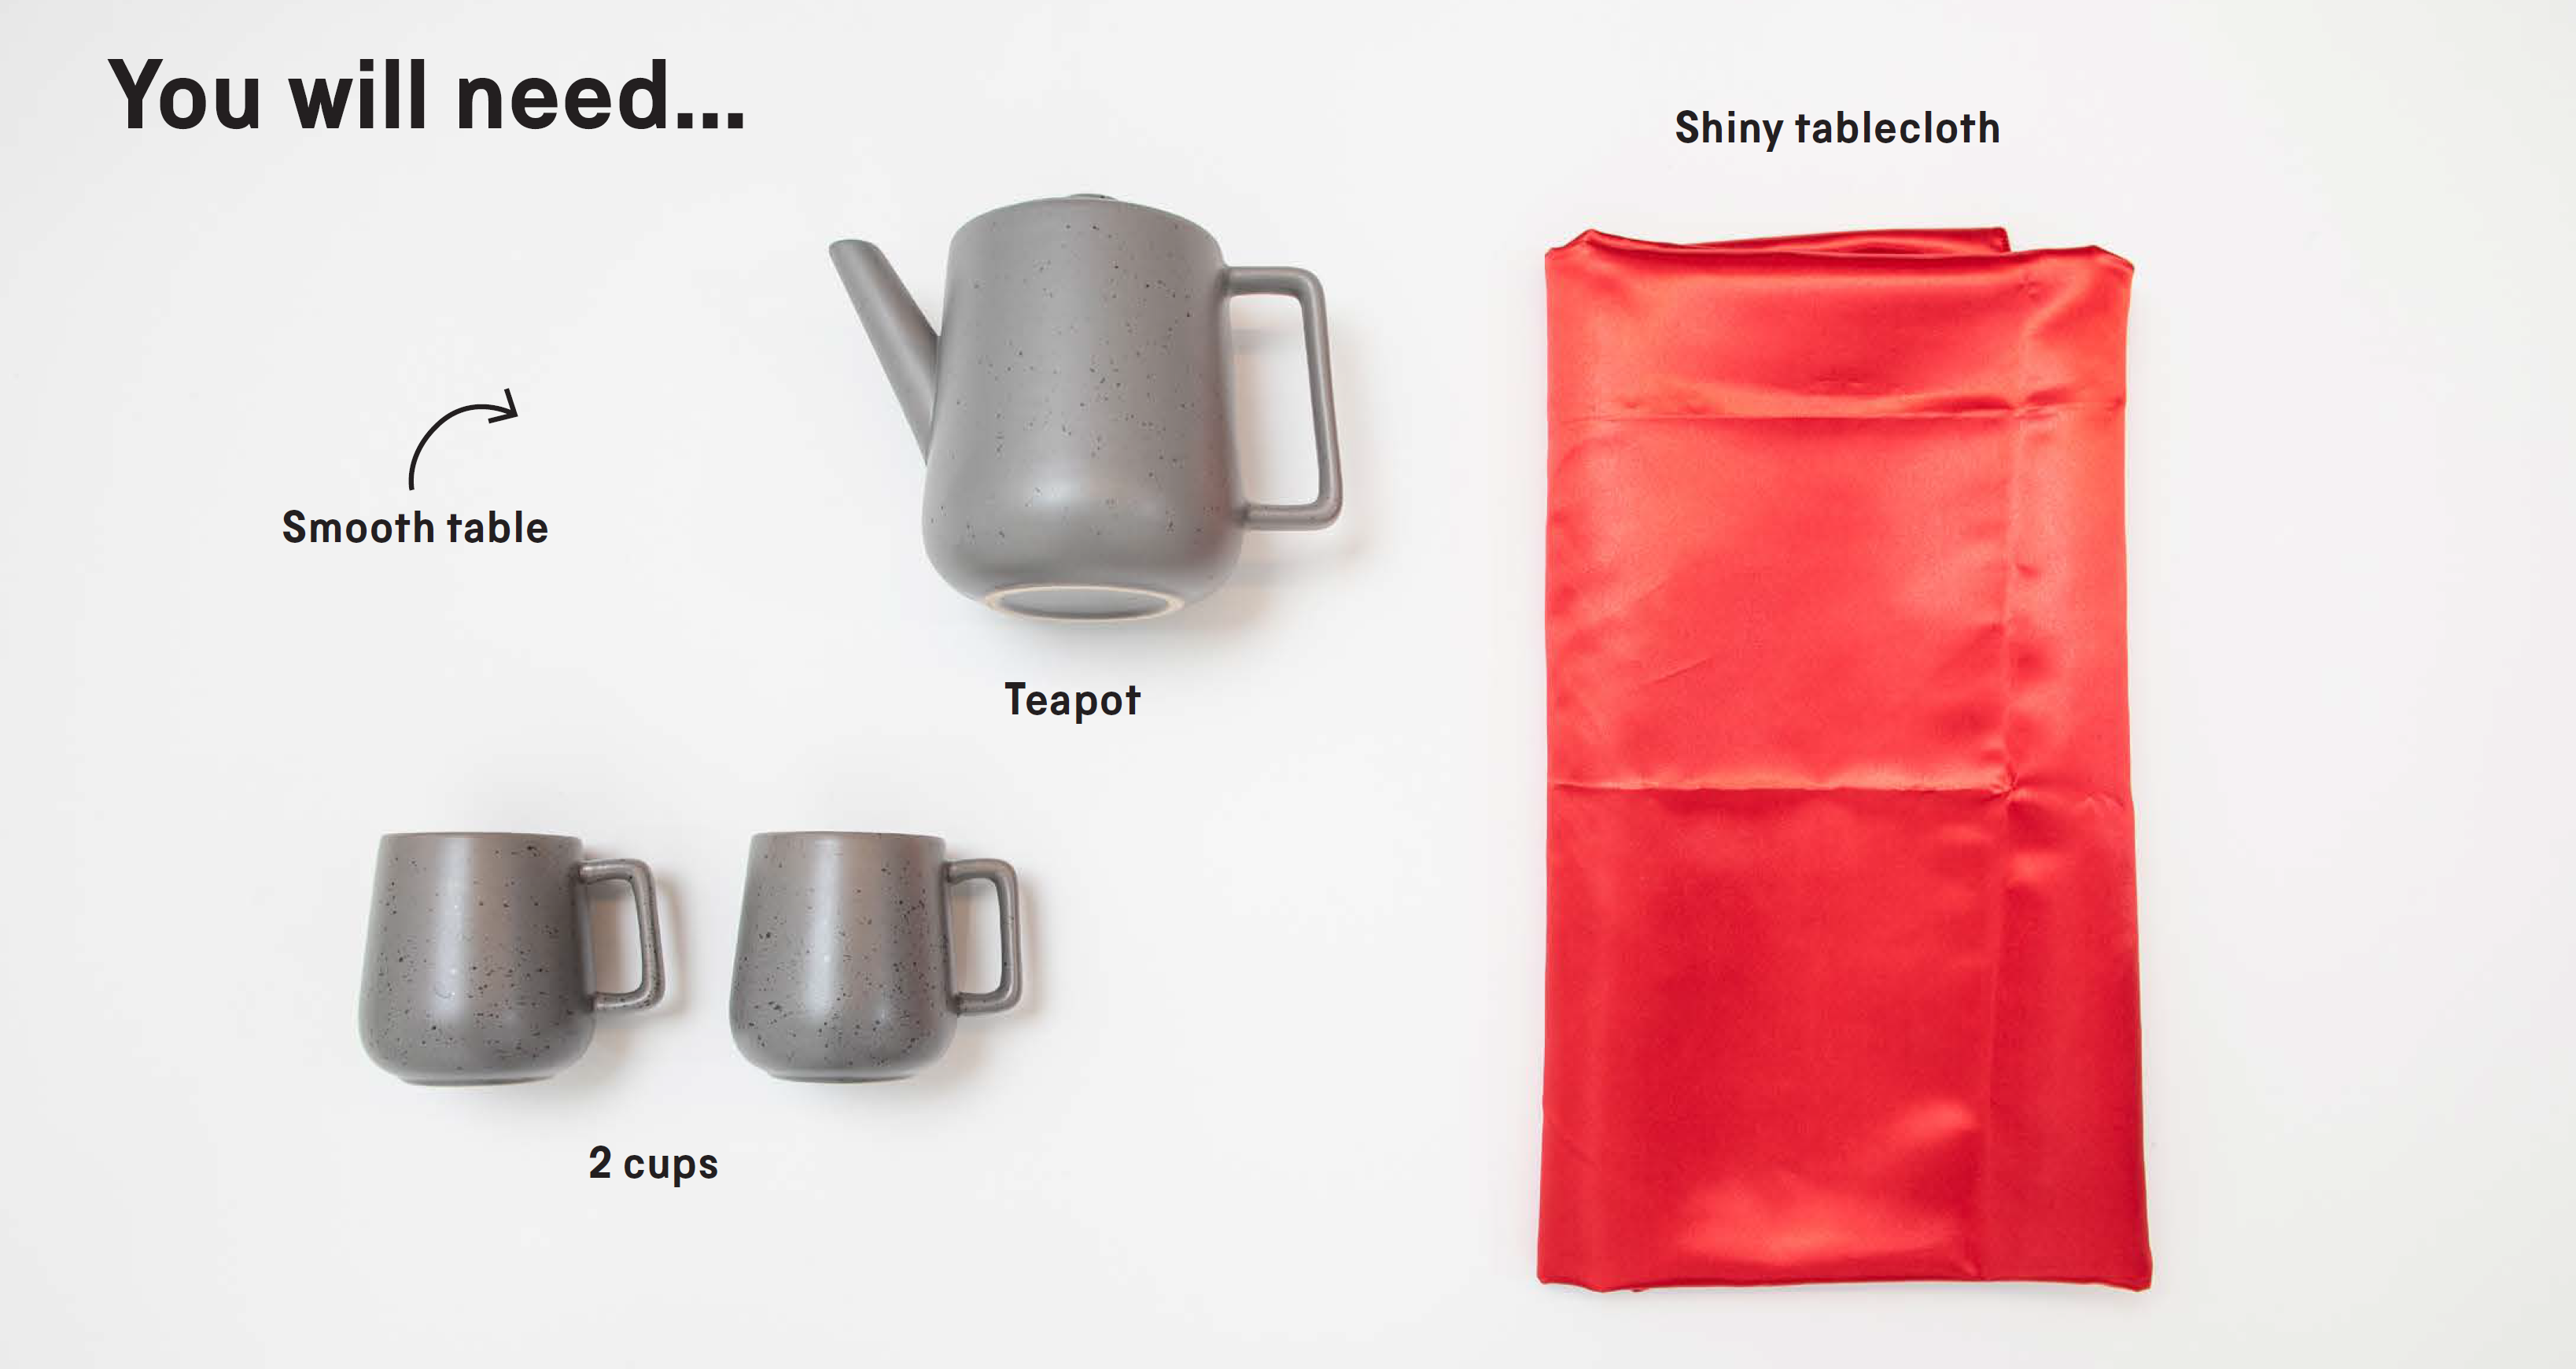 You will need: a smooth table, a teapot, 2 cups and a shiny tablecloth.